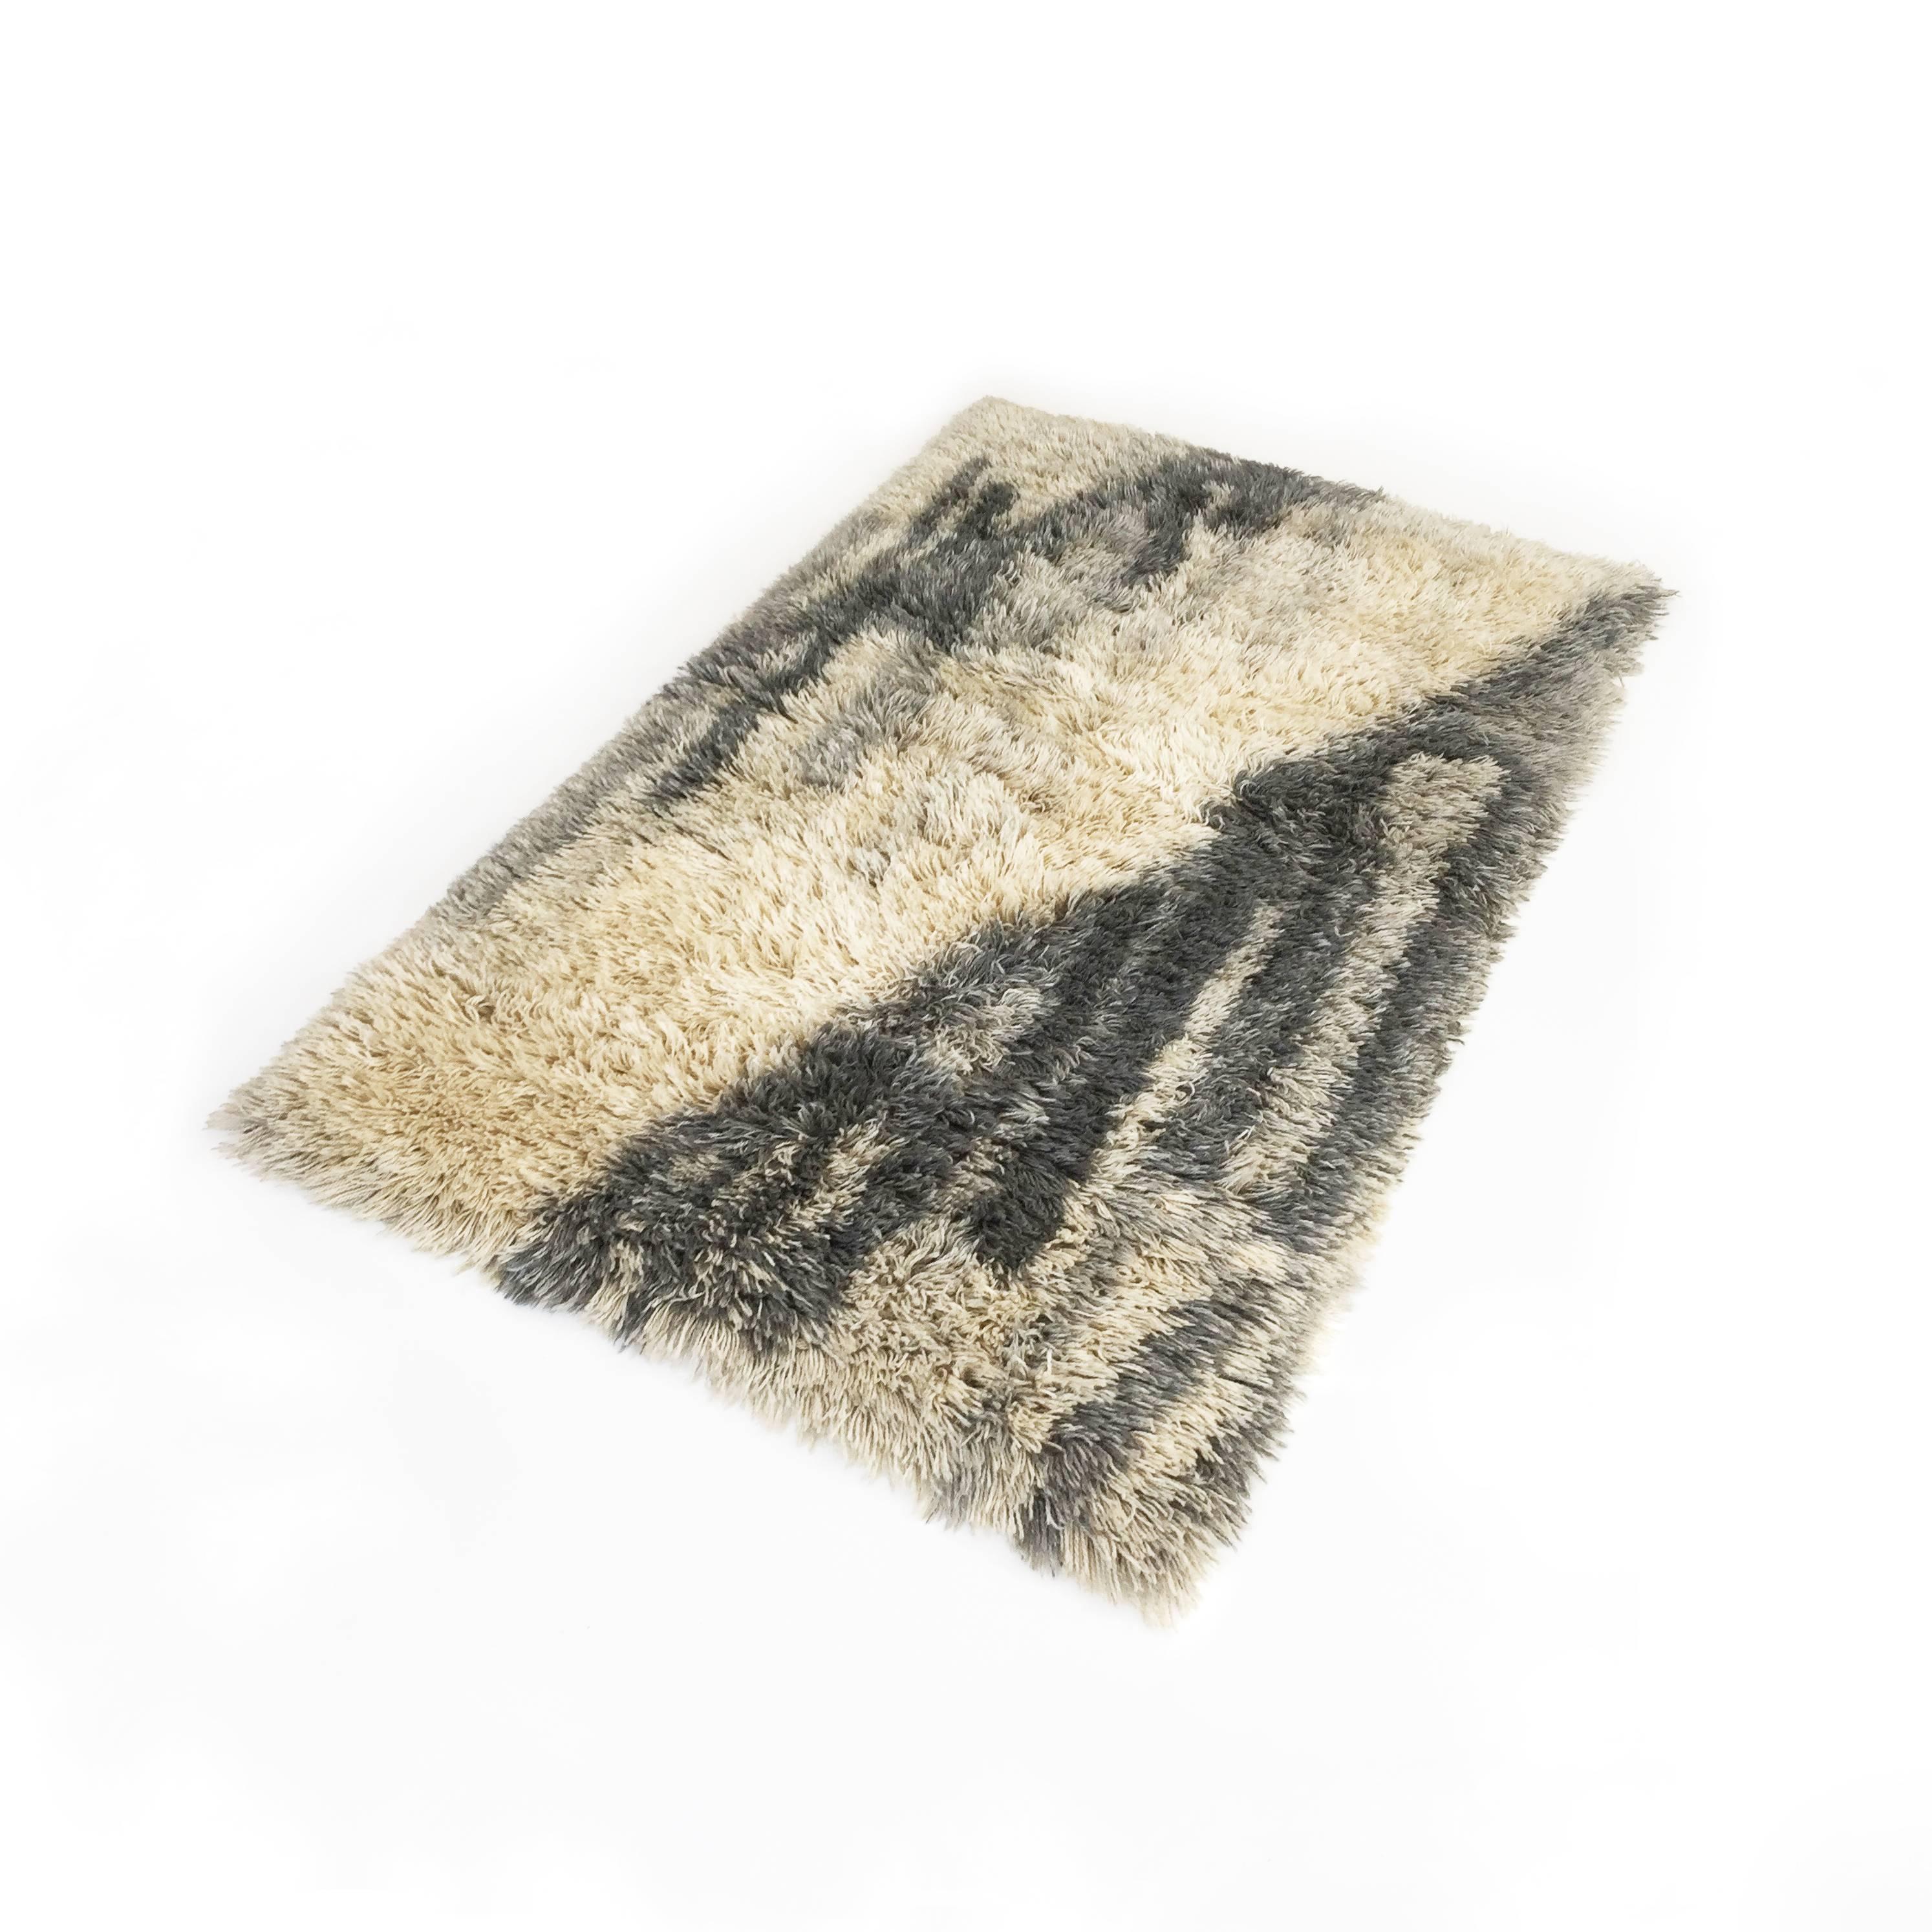 Article:

High pile rya rug


Decade:

1960s


Producer:

EGE Taepper, Denmark
(see images of an old advertisement prospect)


Material:

100% cotton



Description:

This rug is a great example of 60s pop art interior. Made